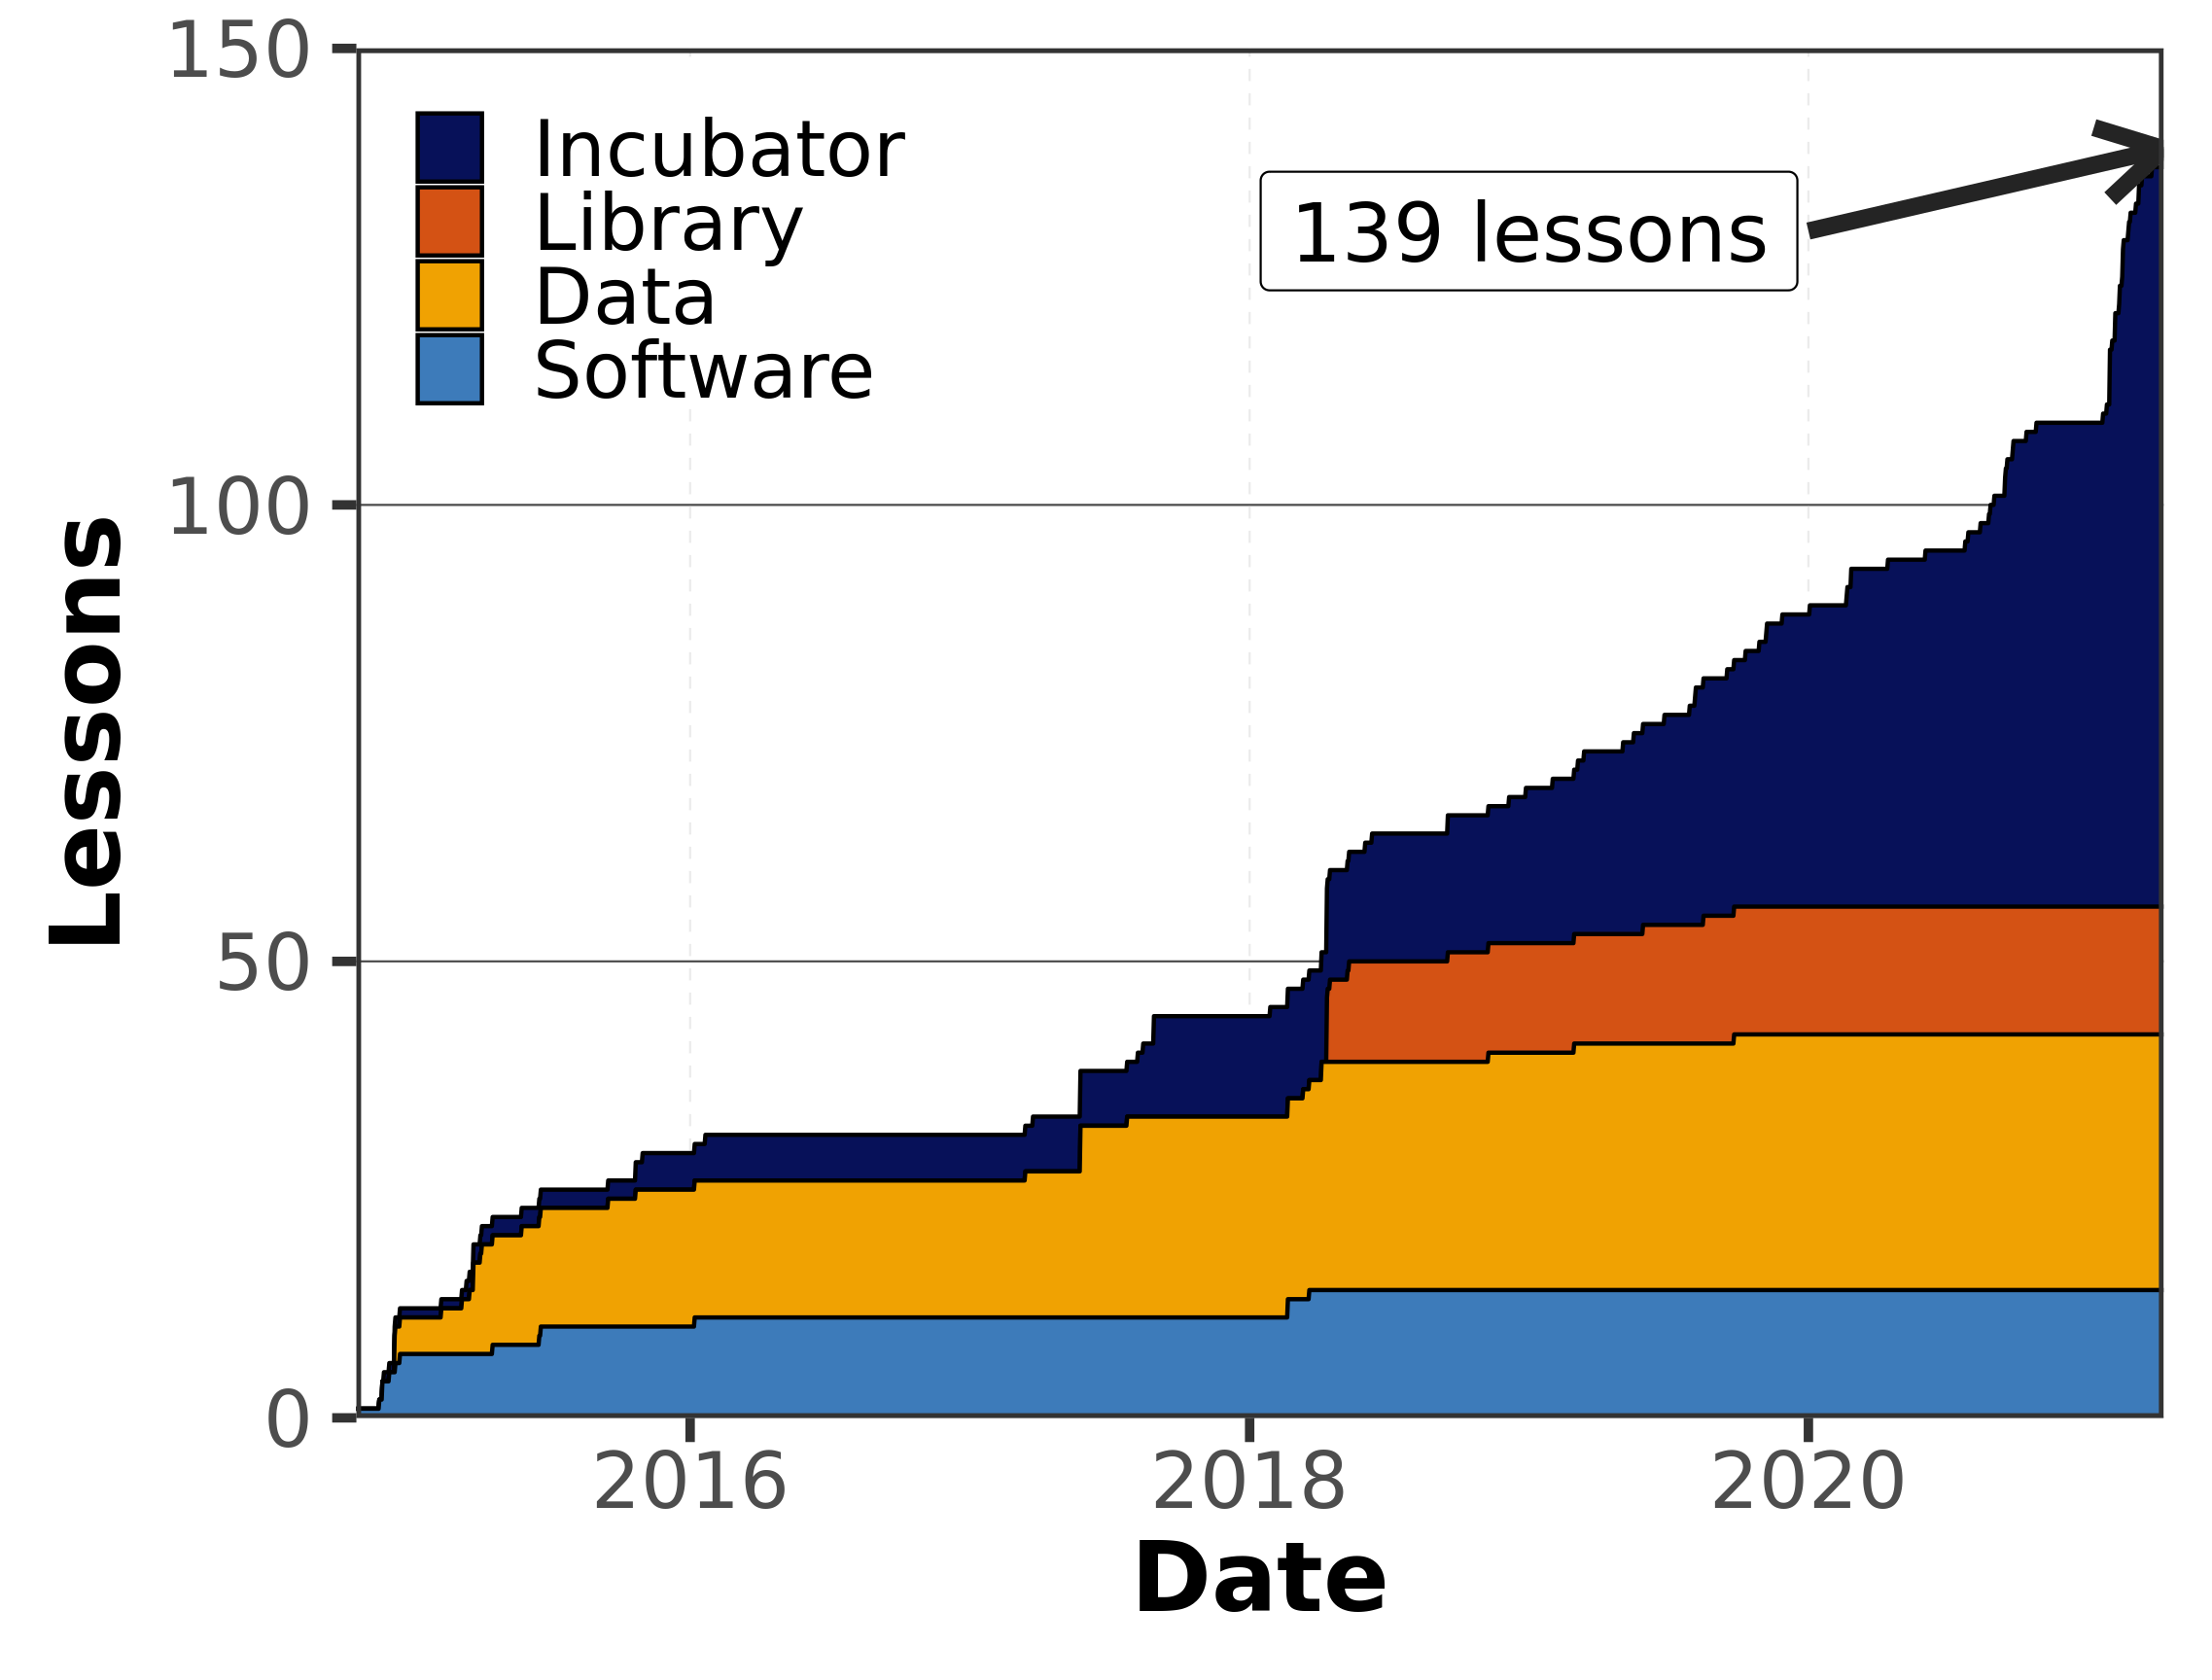 A stacked area chart showing the growth in the number of lessons from 2015 to present day. There is an arrow pointing to the top of the data that says "139 lessons". The data are stratified by our four programs: Software Carpentry on bottom, followed by Data Carpentry, Library Carpentry, and Incubator. The incubator comprises more than one half of all lessons in the current day.